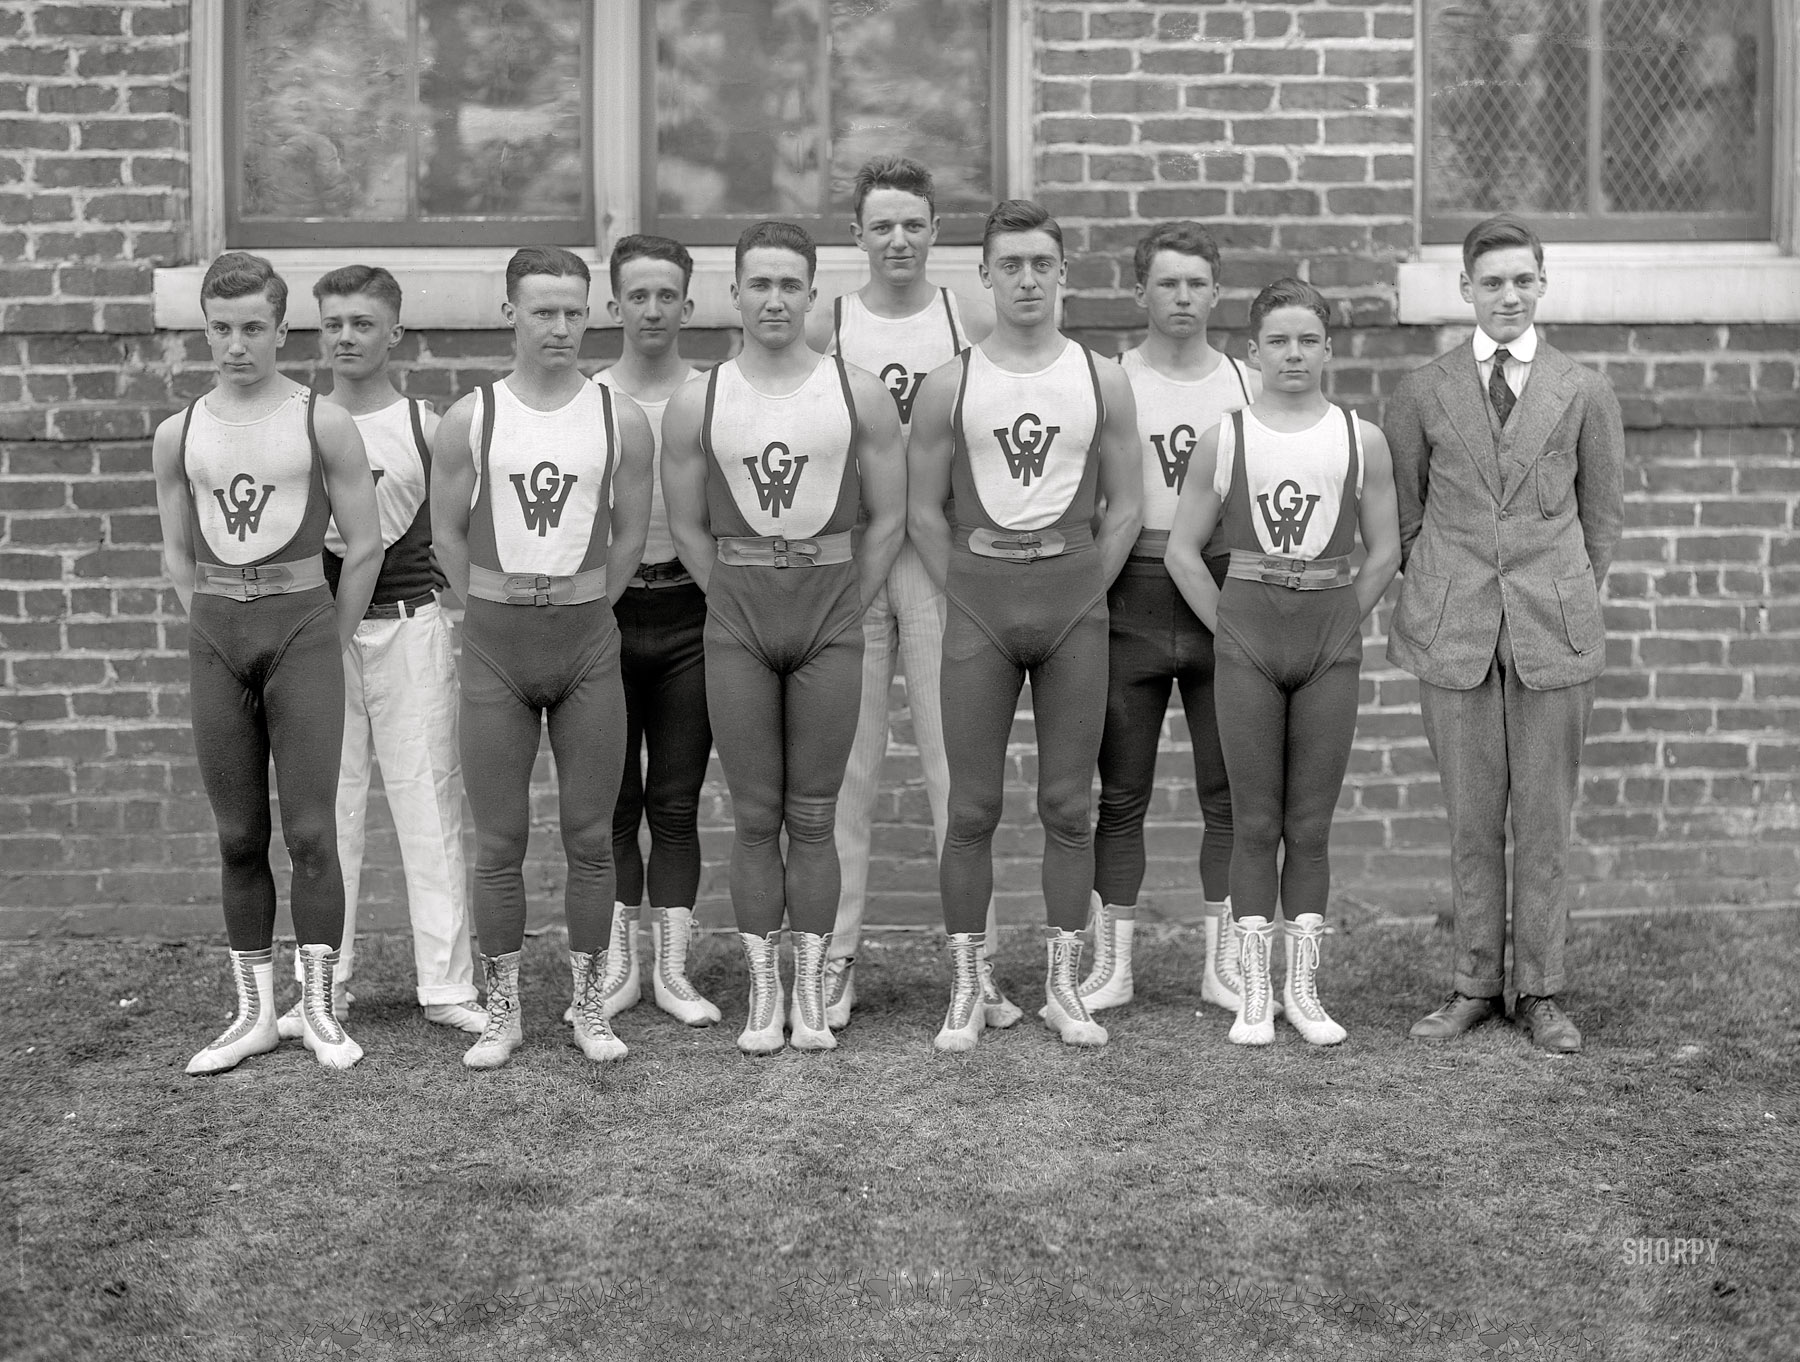 Orange, Virginia, circa 1910. "Woodberry Forest Gym Team." Our second look at these prep-school superheroes. Harris & Ewing glass negative. View full size.